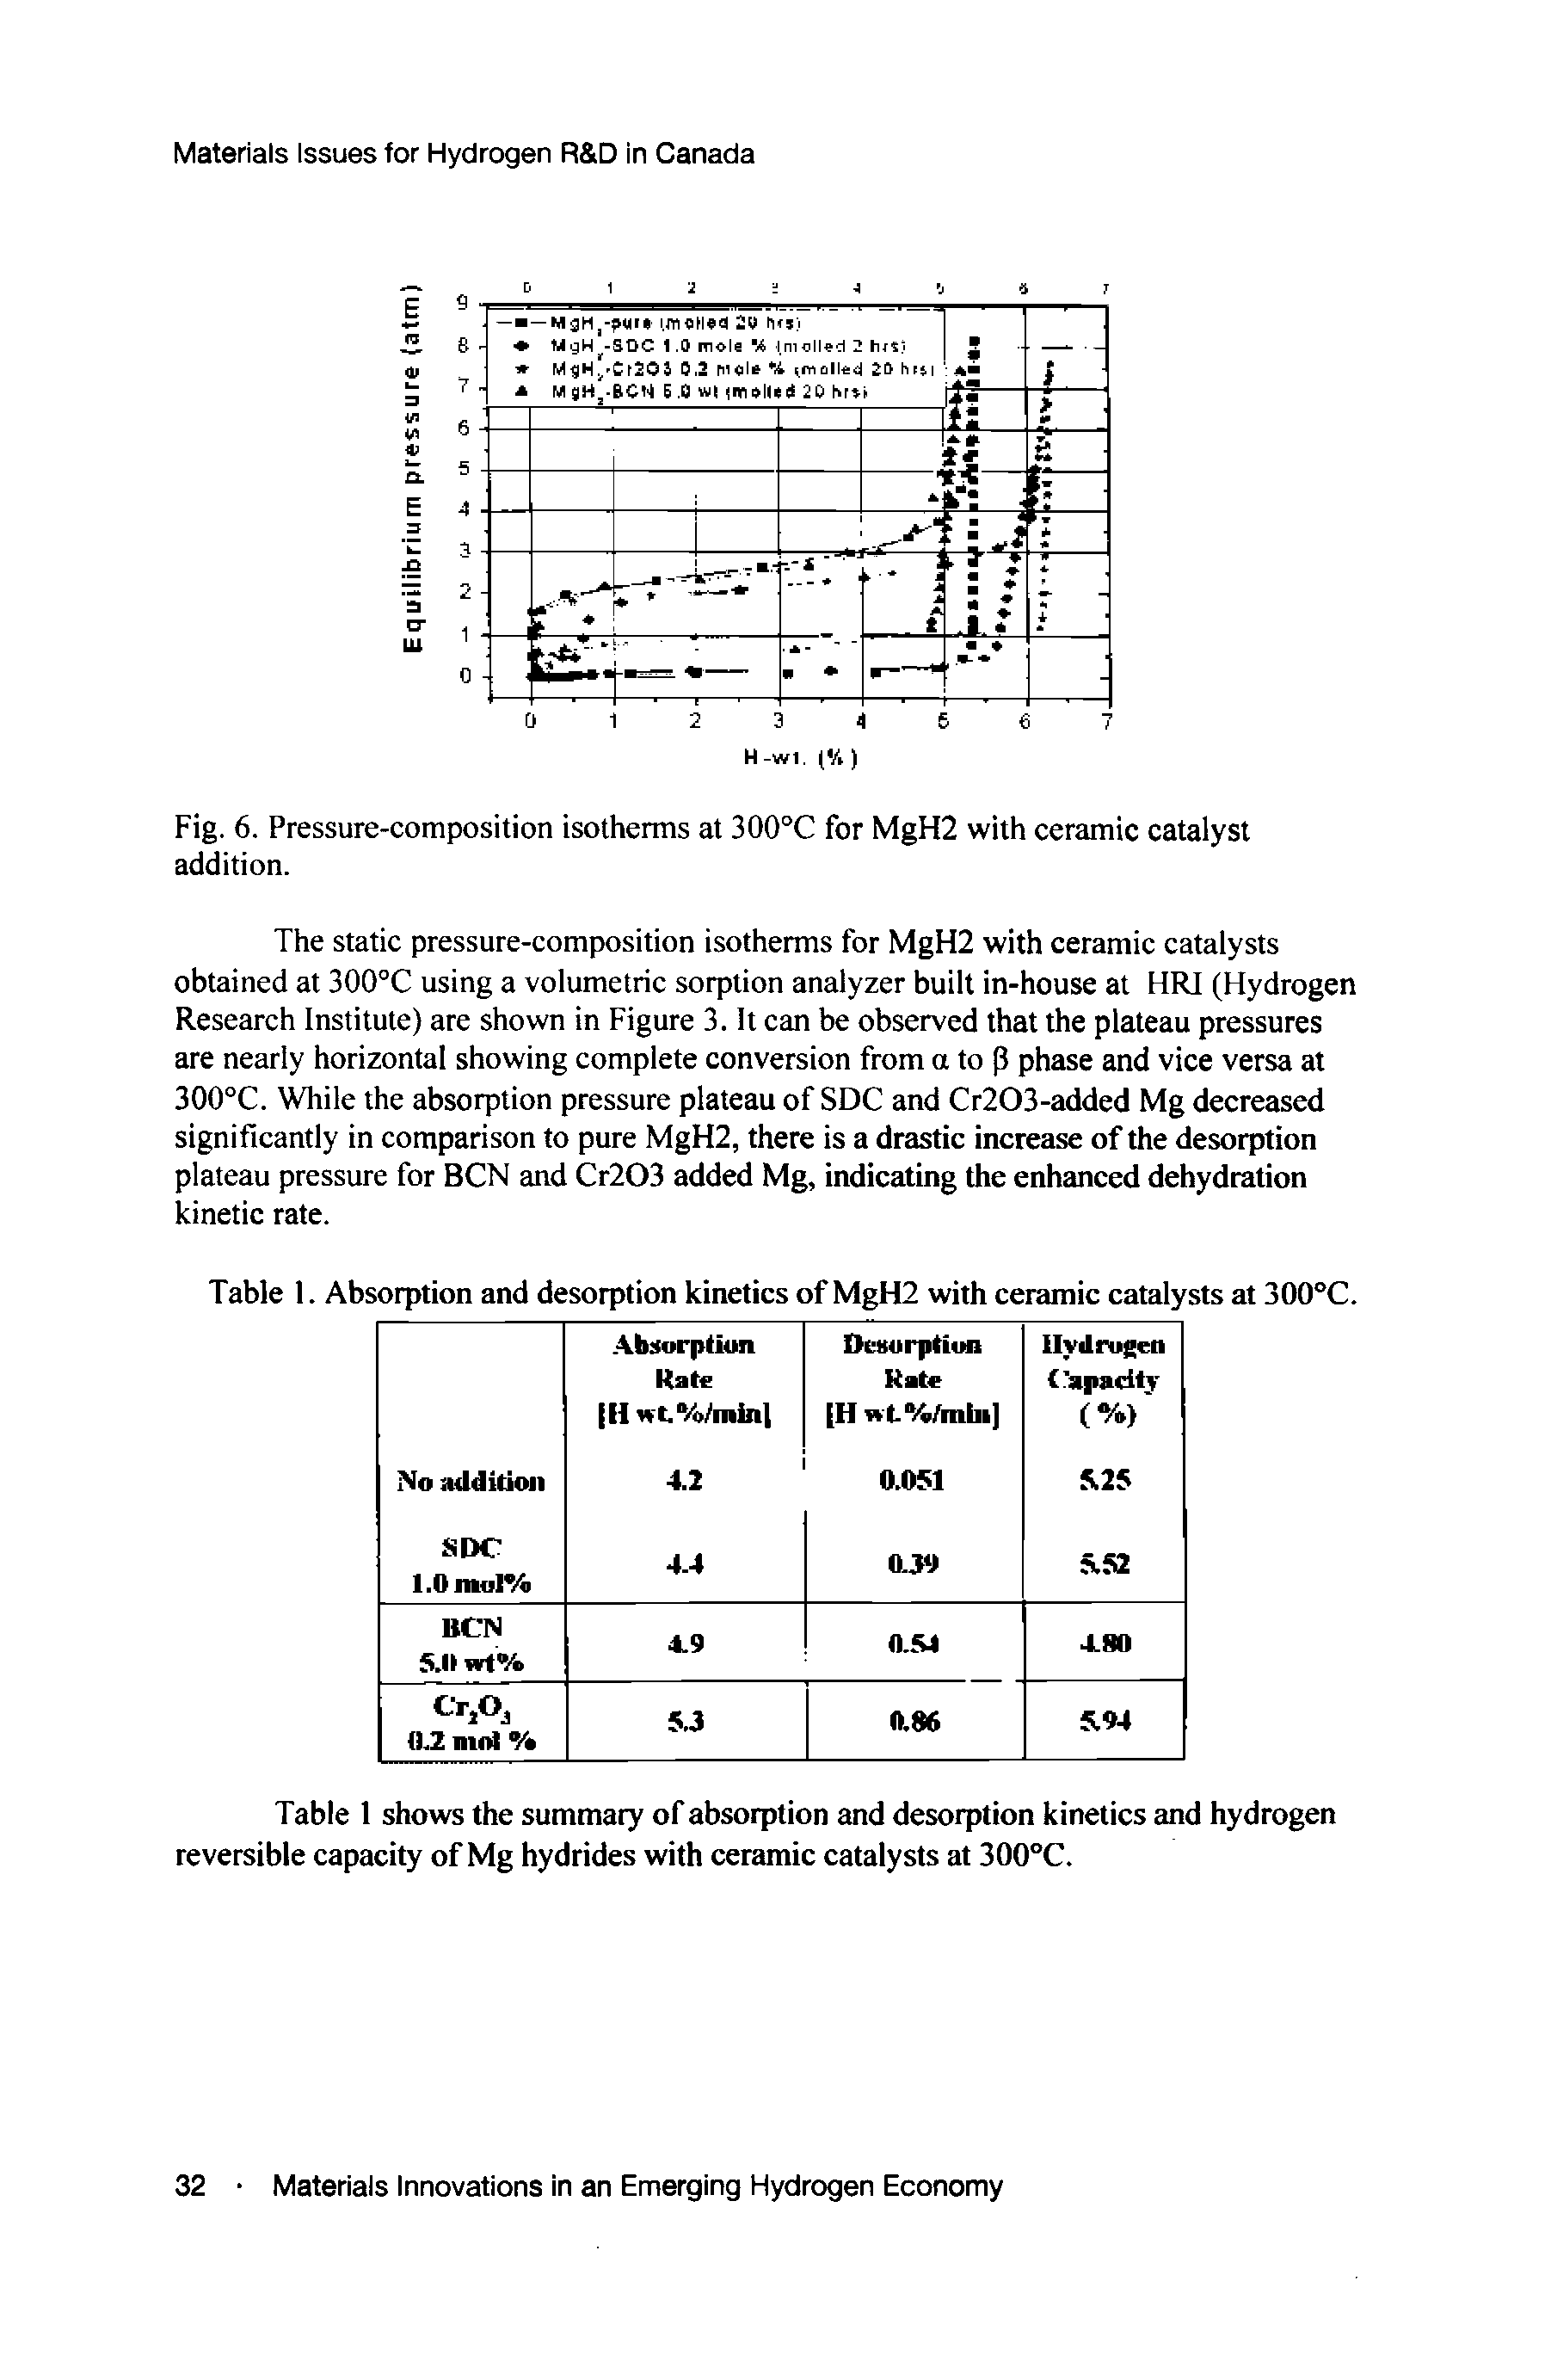 Fig. 6. Pressure-composition isotherms at 300°C for MgH2 with ceramic catalyst addition.